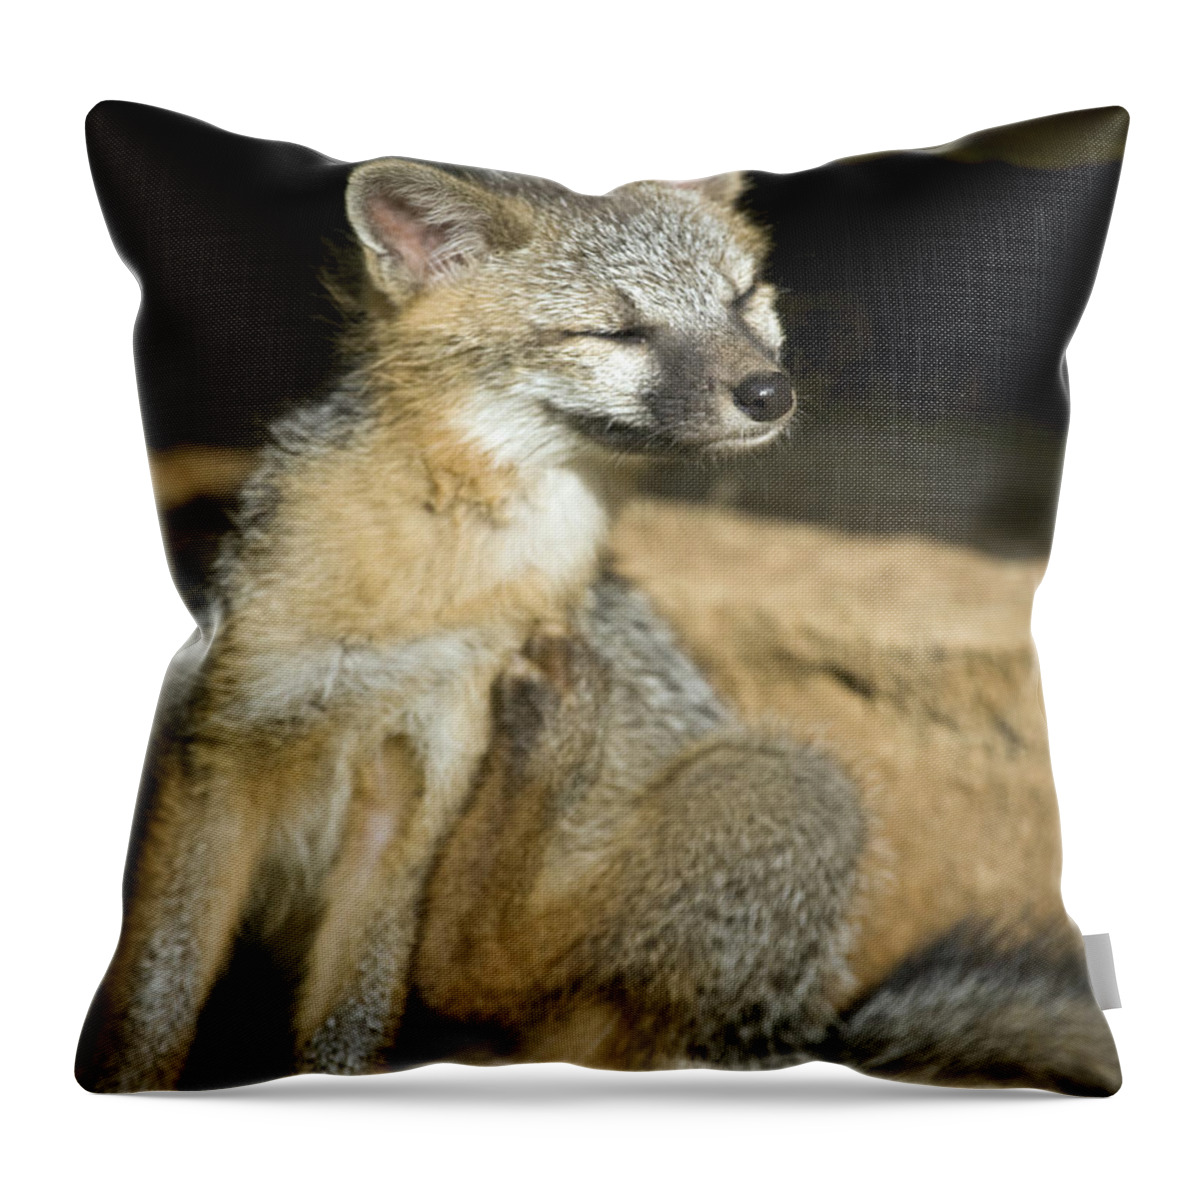 Gray Fox Throw Pillow featuring the photograph Scratching Gray Fox by Michael Dougherty